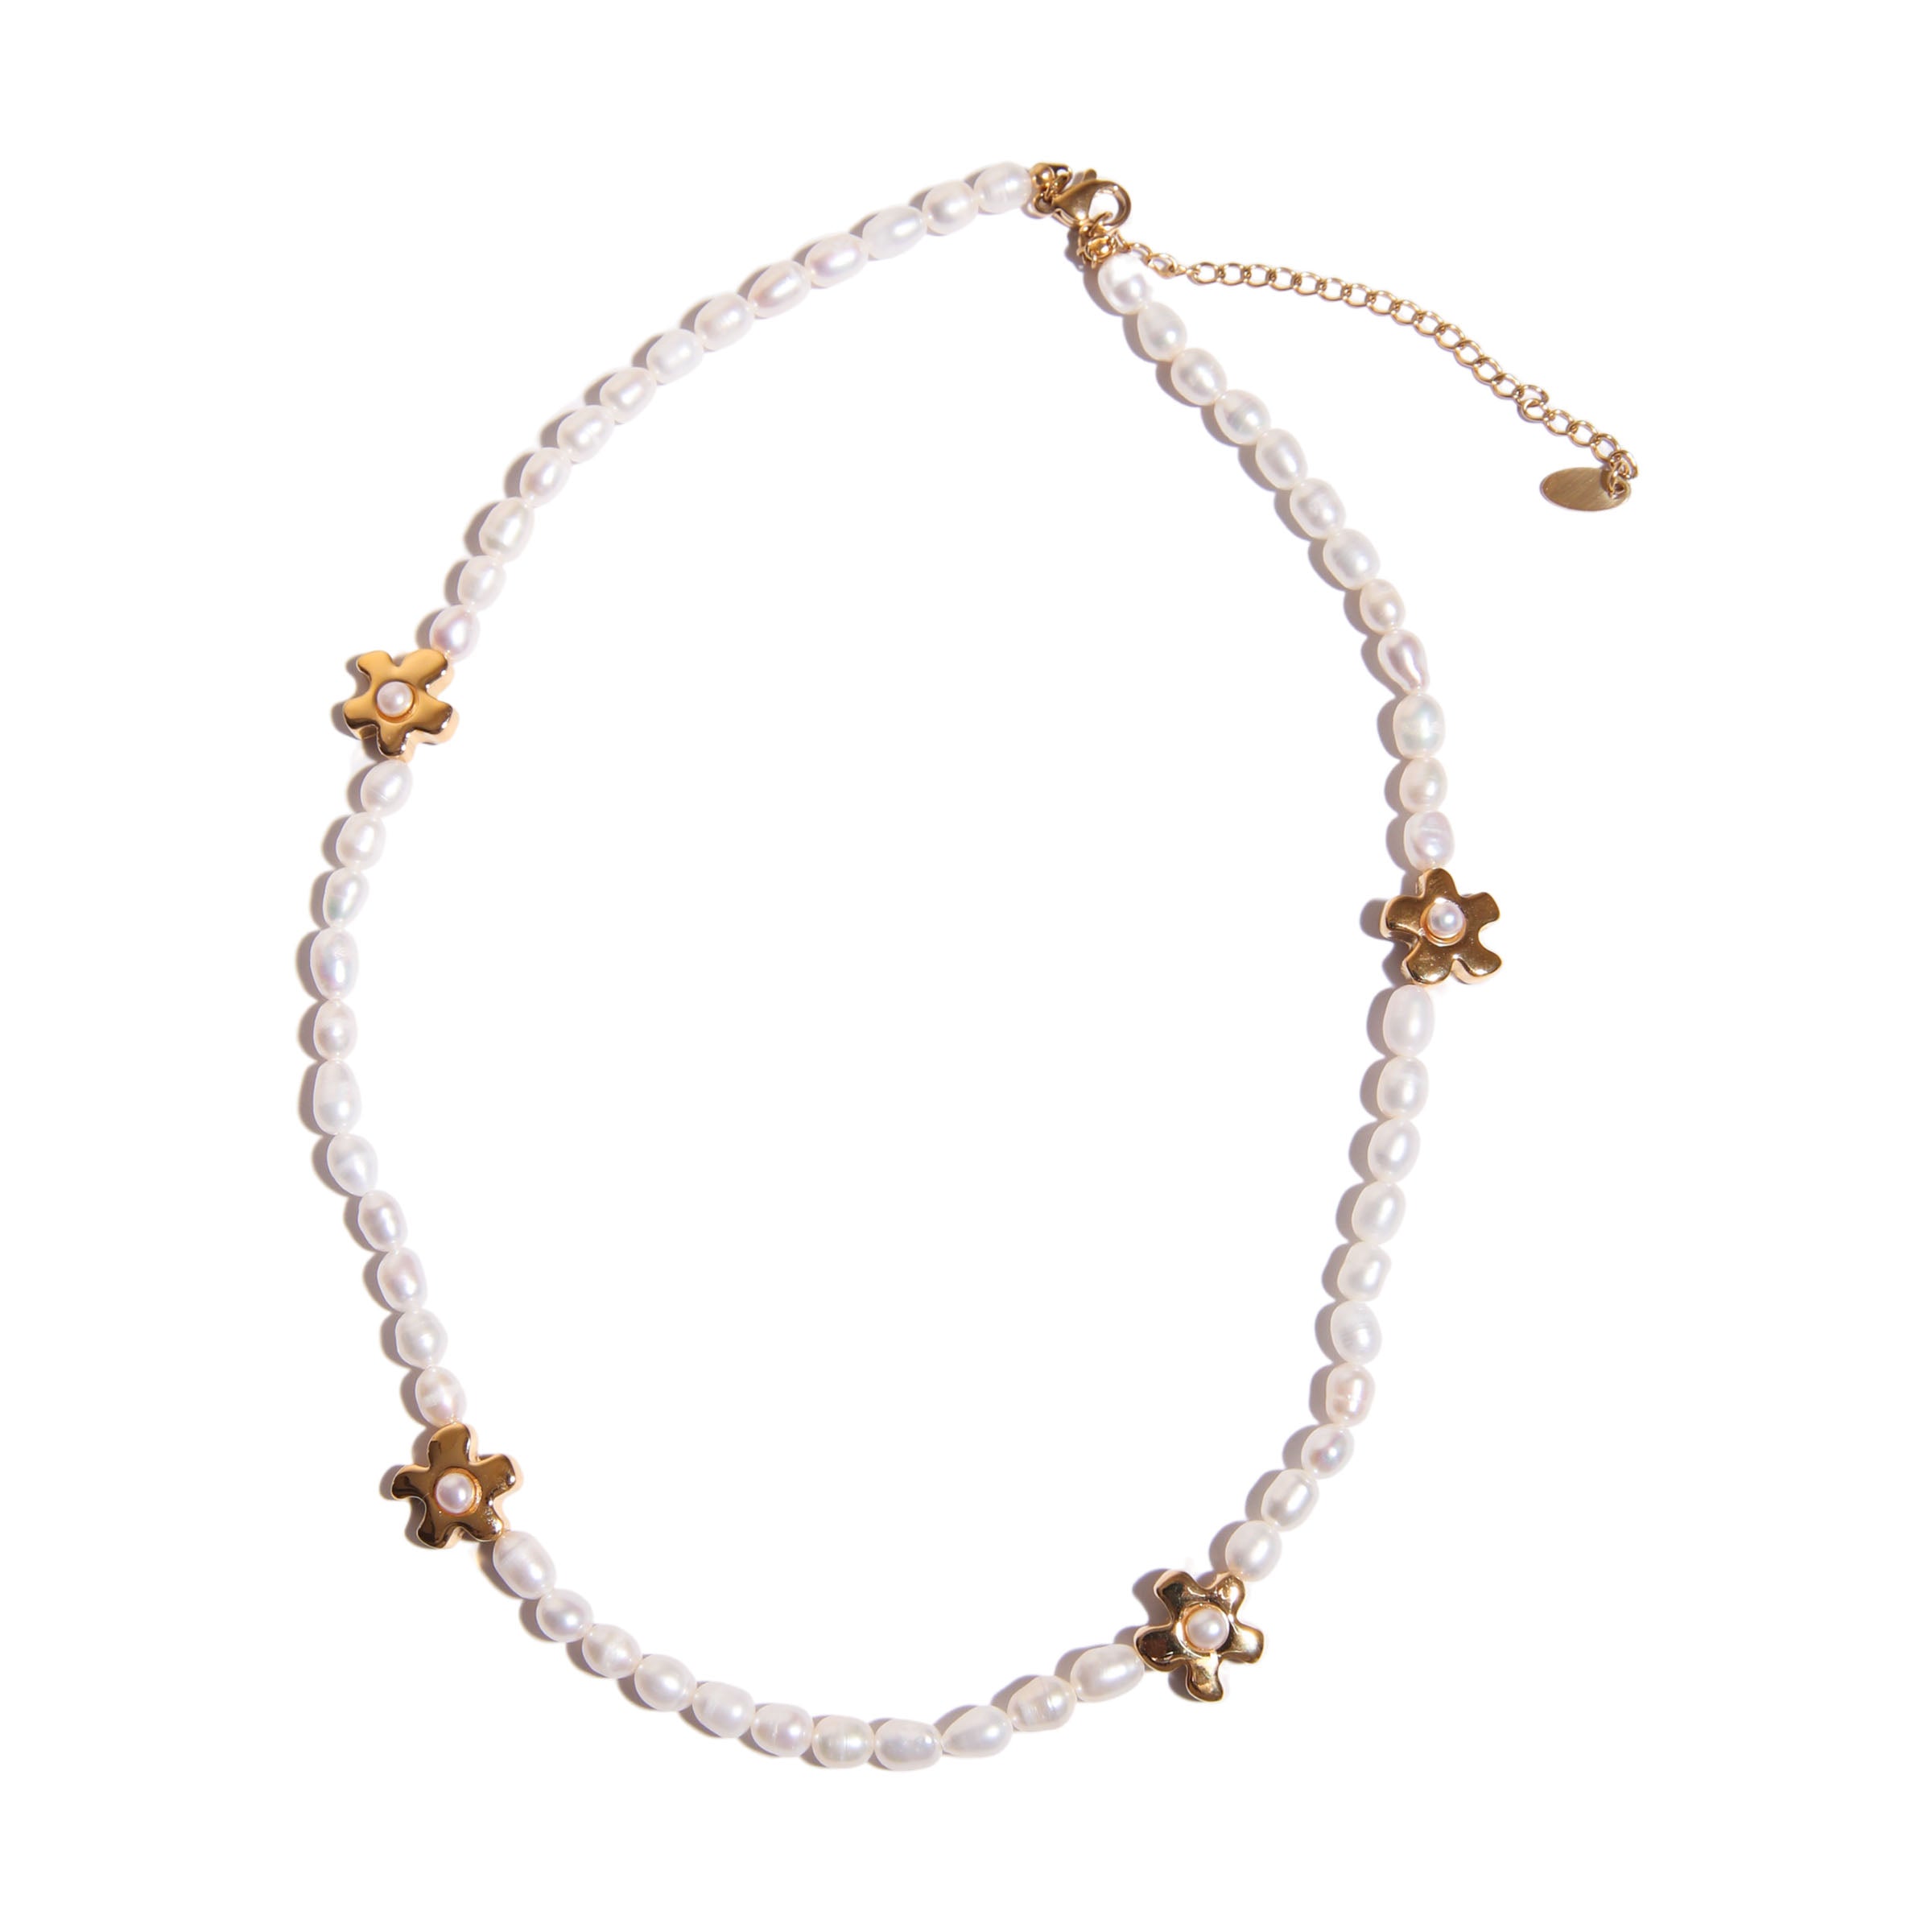 Aesthetic Flower Gold and Fresh Water Pearl Necklace and Bracelet Set